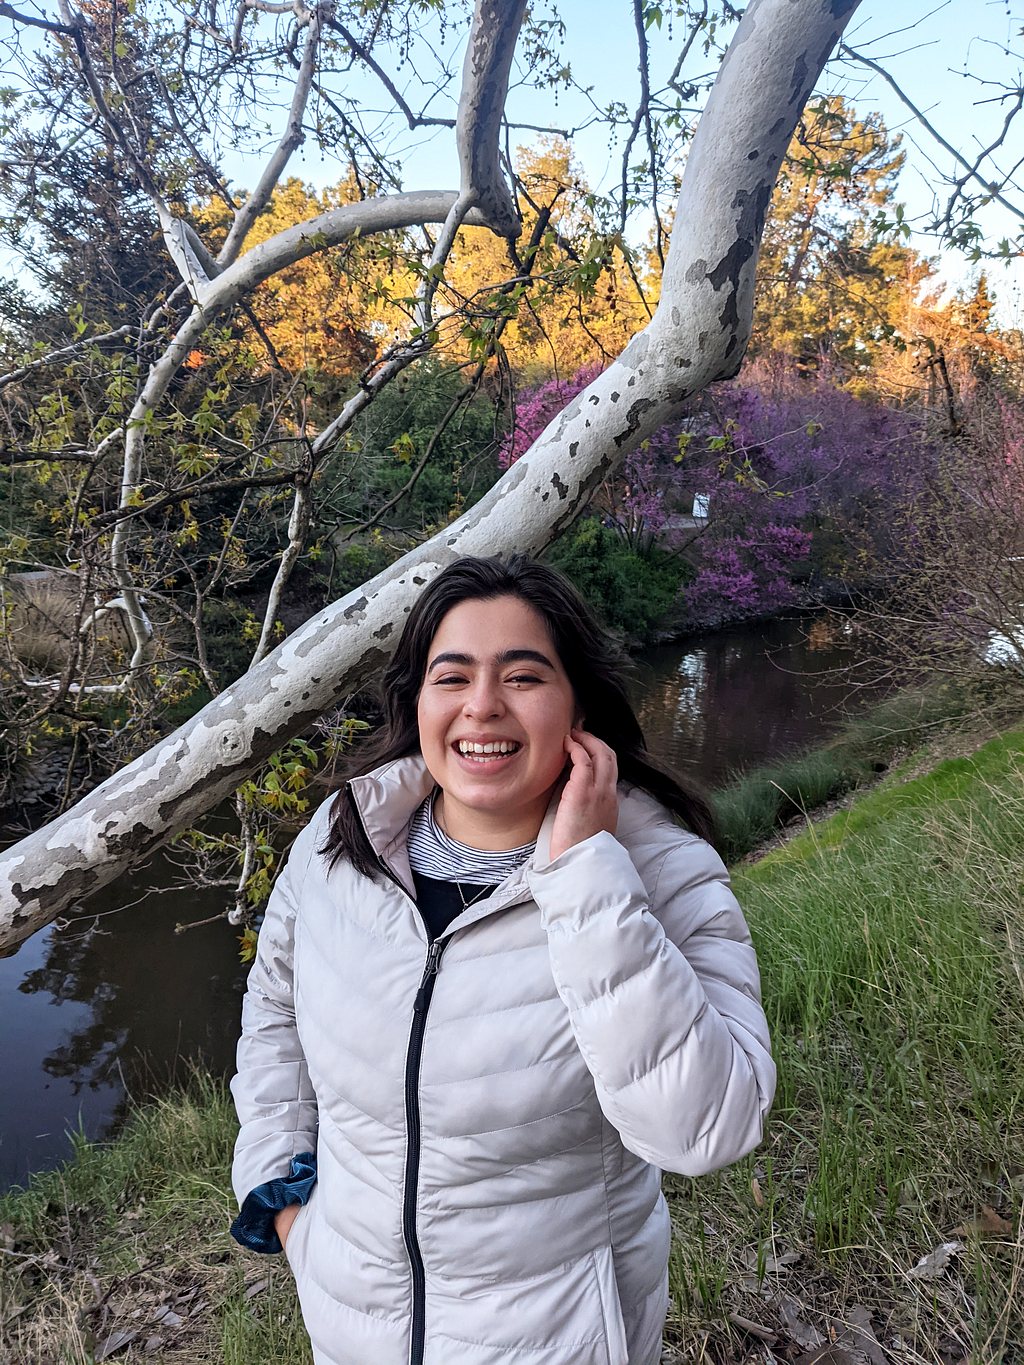 Dani Solis stands on a grassy hill by a tree, smiling.